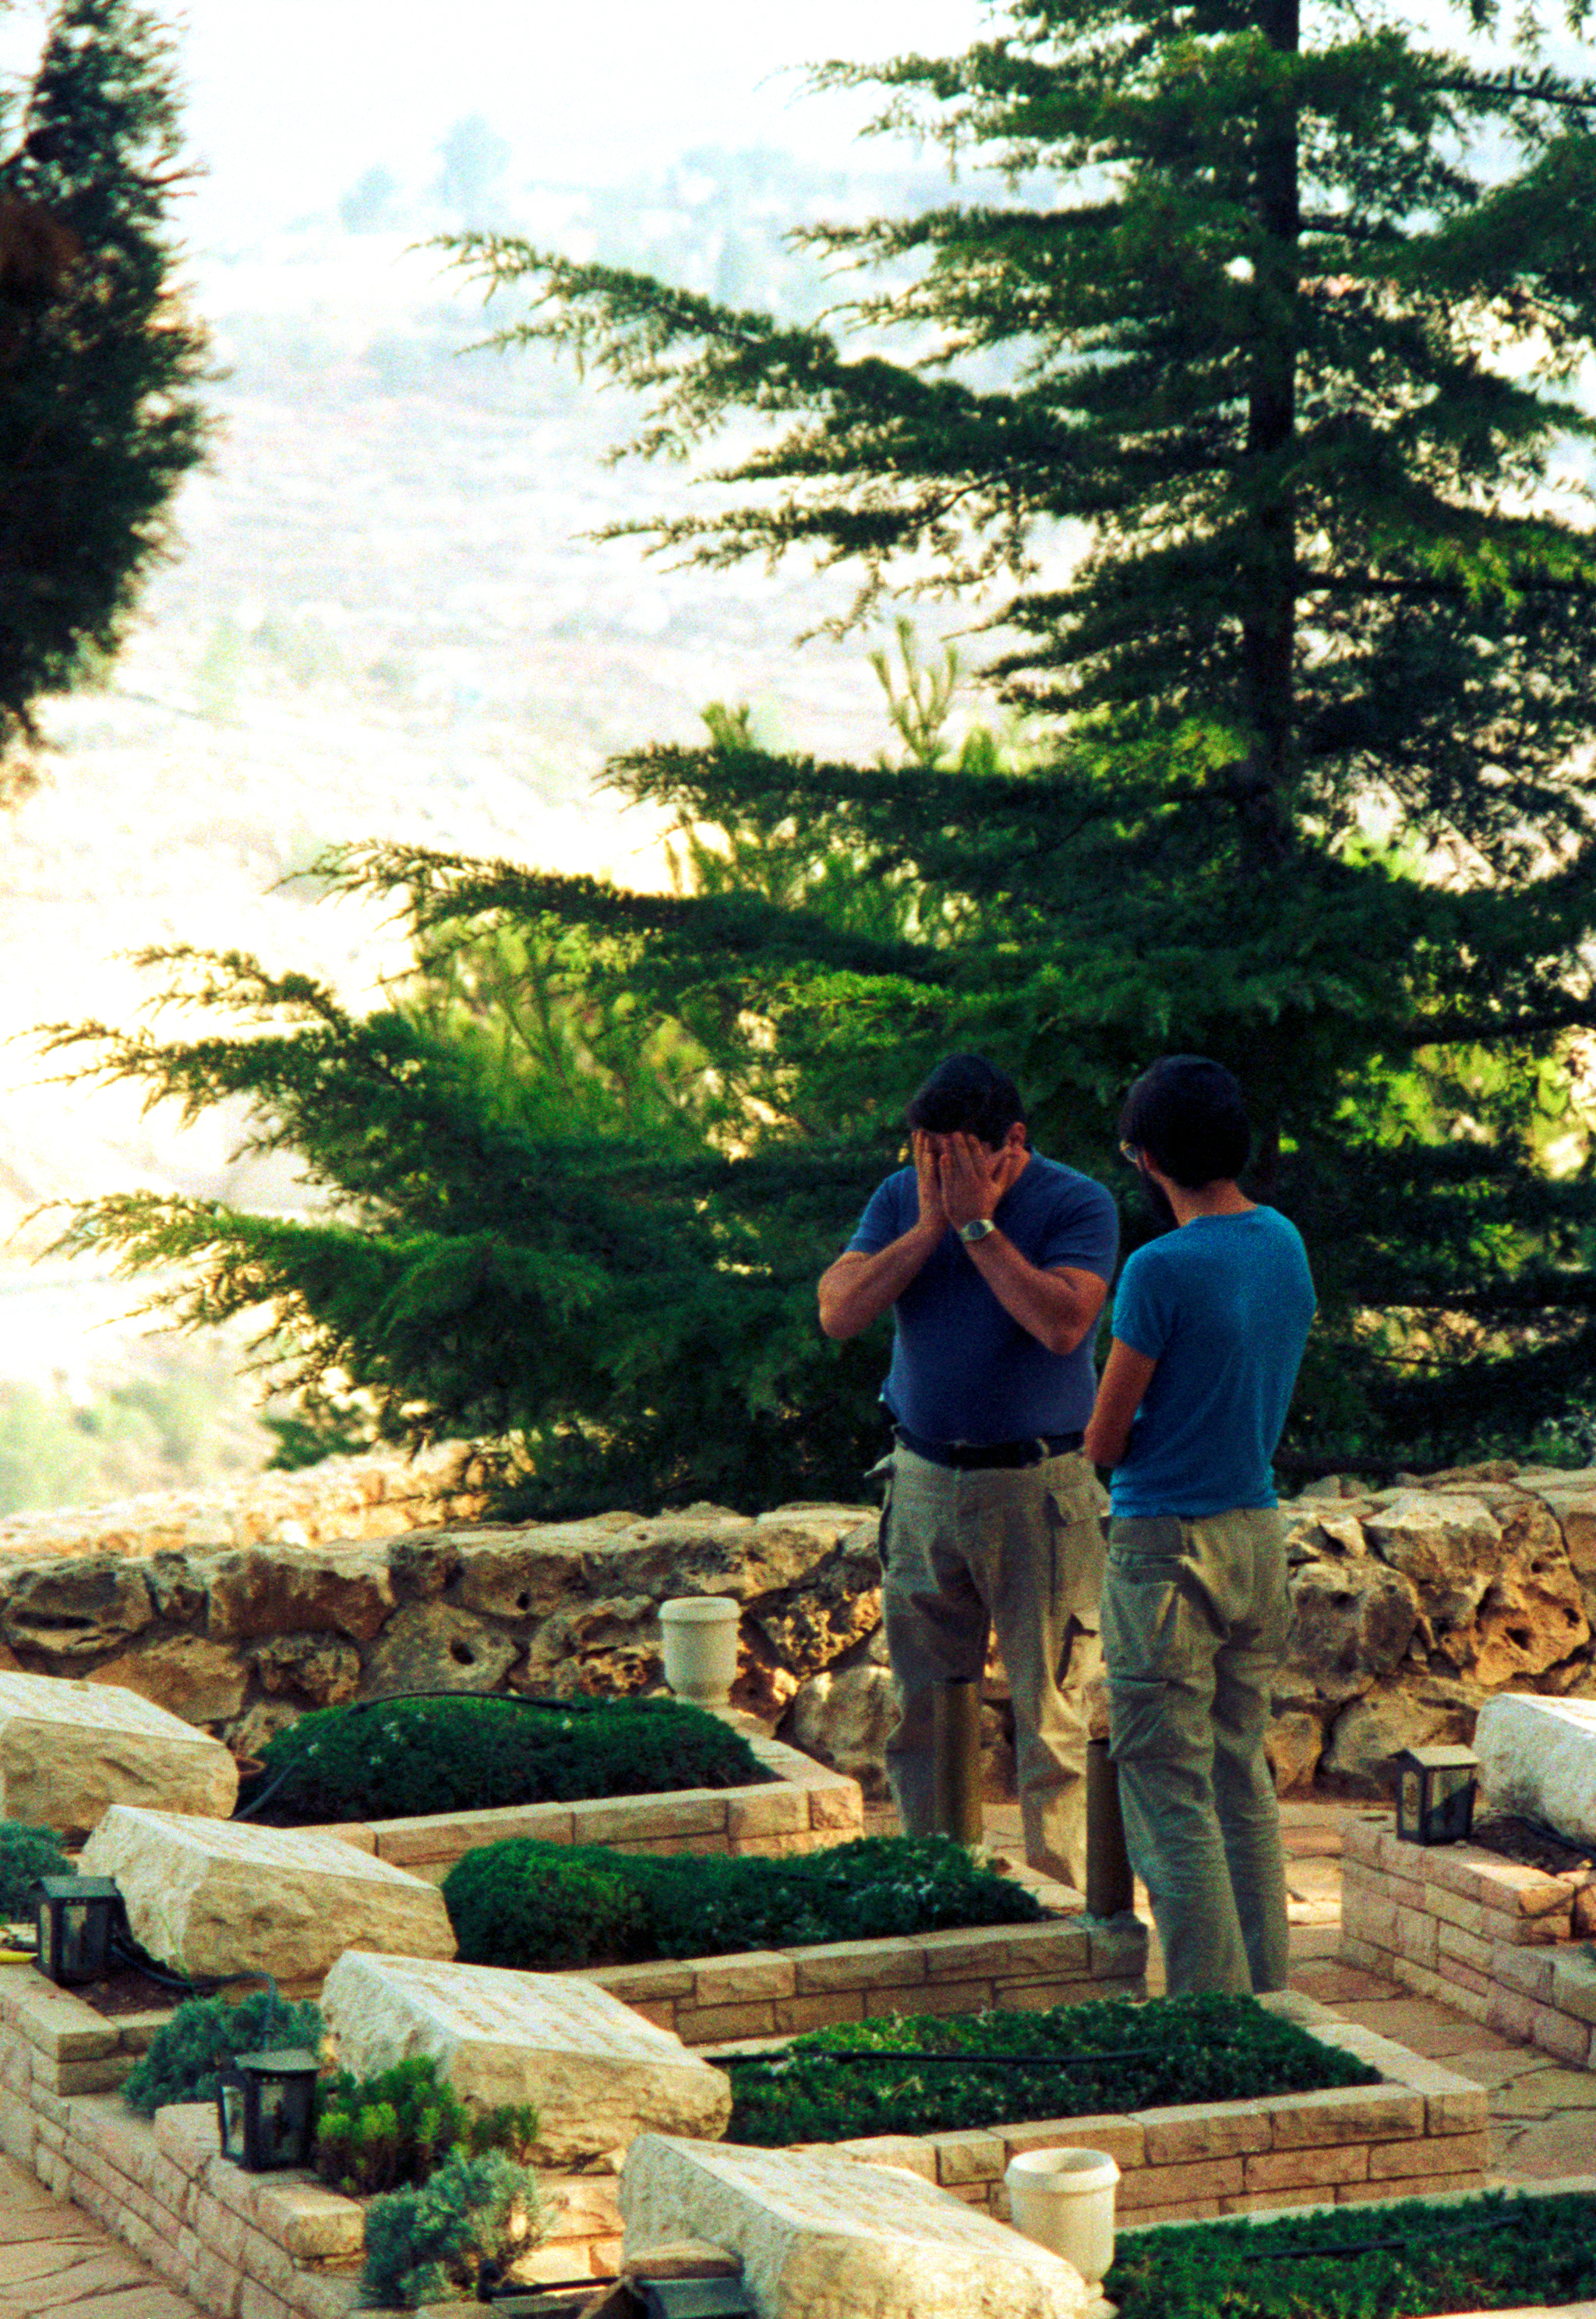 Commander Amedi, at left, takes a new member of the Jerusalem bomb squad to the military section of a cemetery overlooking the city to visit the grave of a bomb disposal officer who gave his life to a bomb.